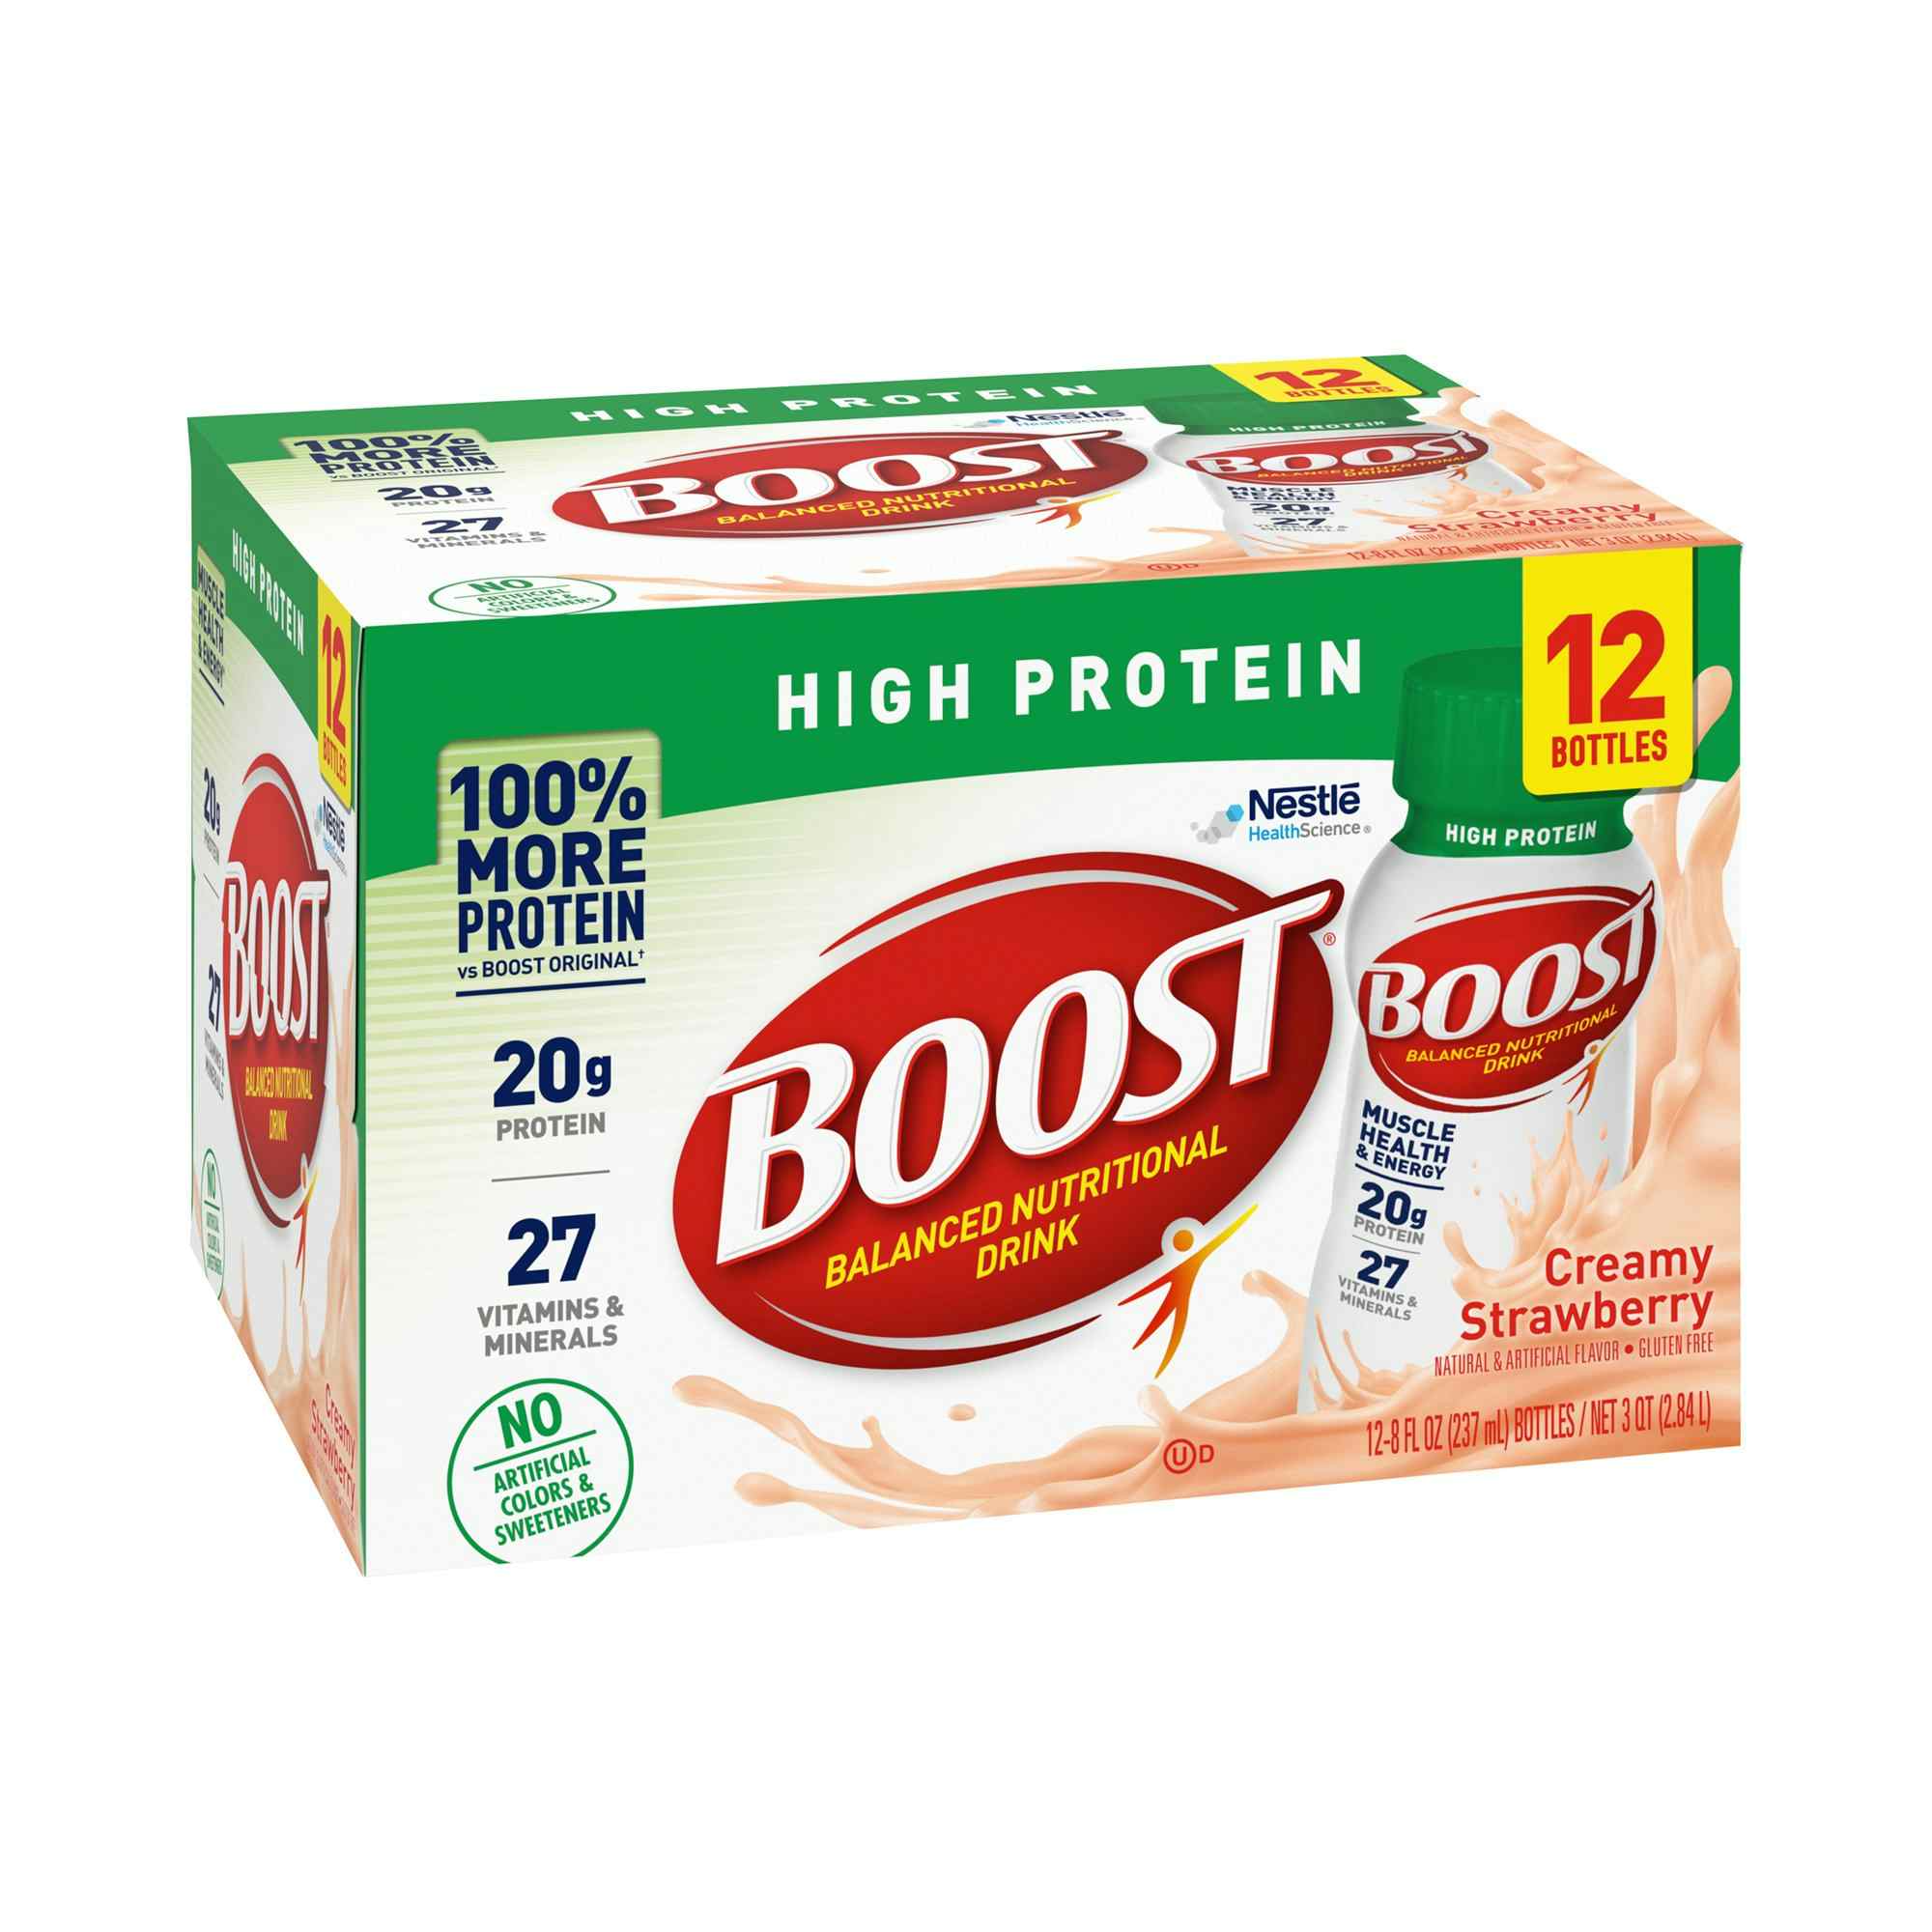 Boost High Protein Balanced Nutritional Drink, 8 oz., Creamy Strawberry, 12384278, Case of 24 (2 Packs)